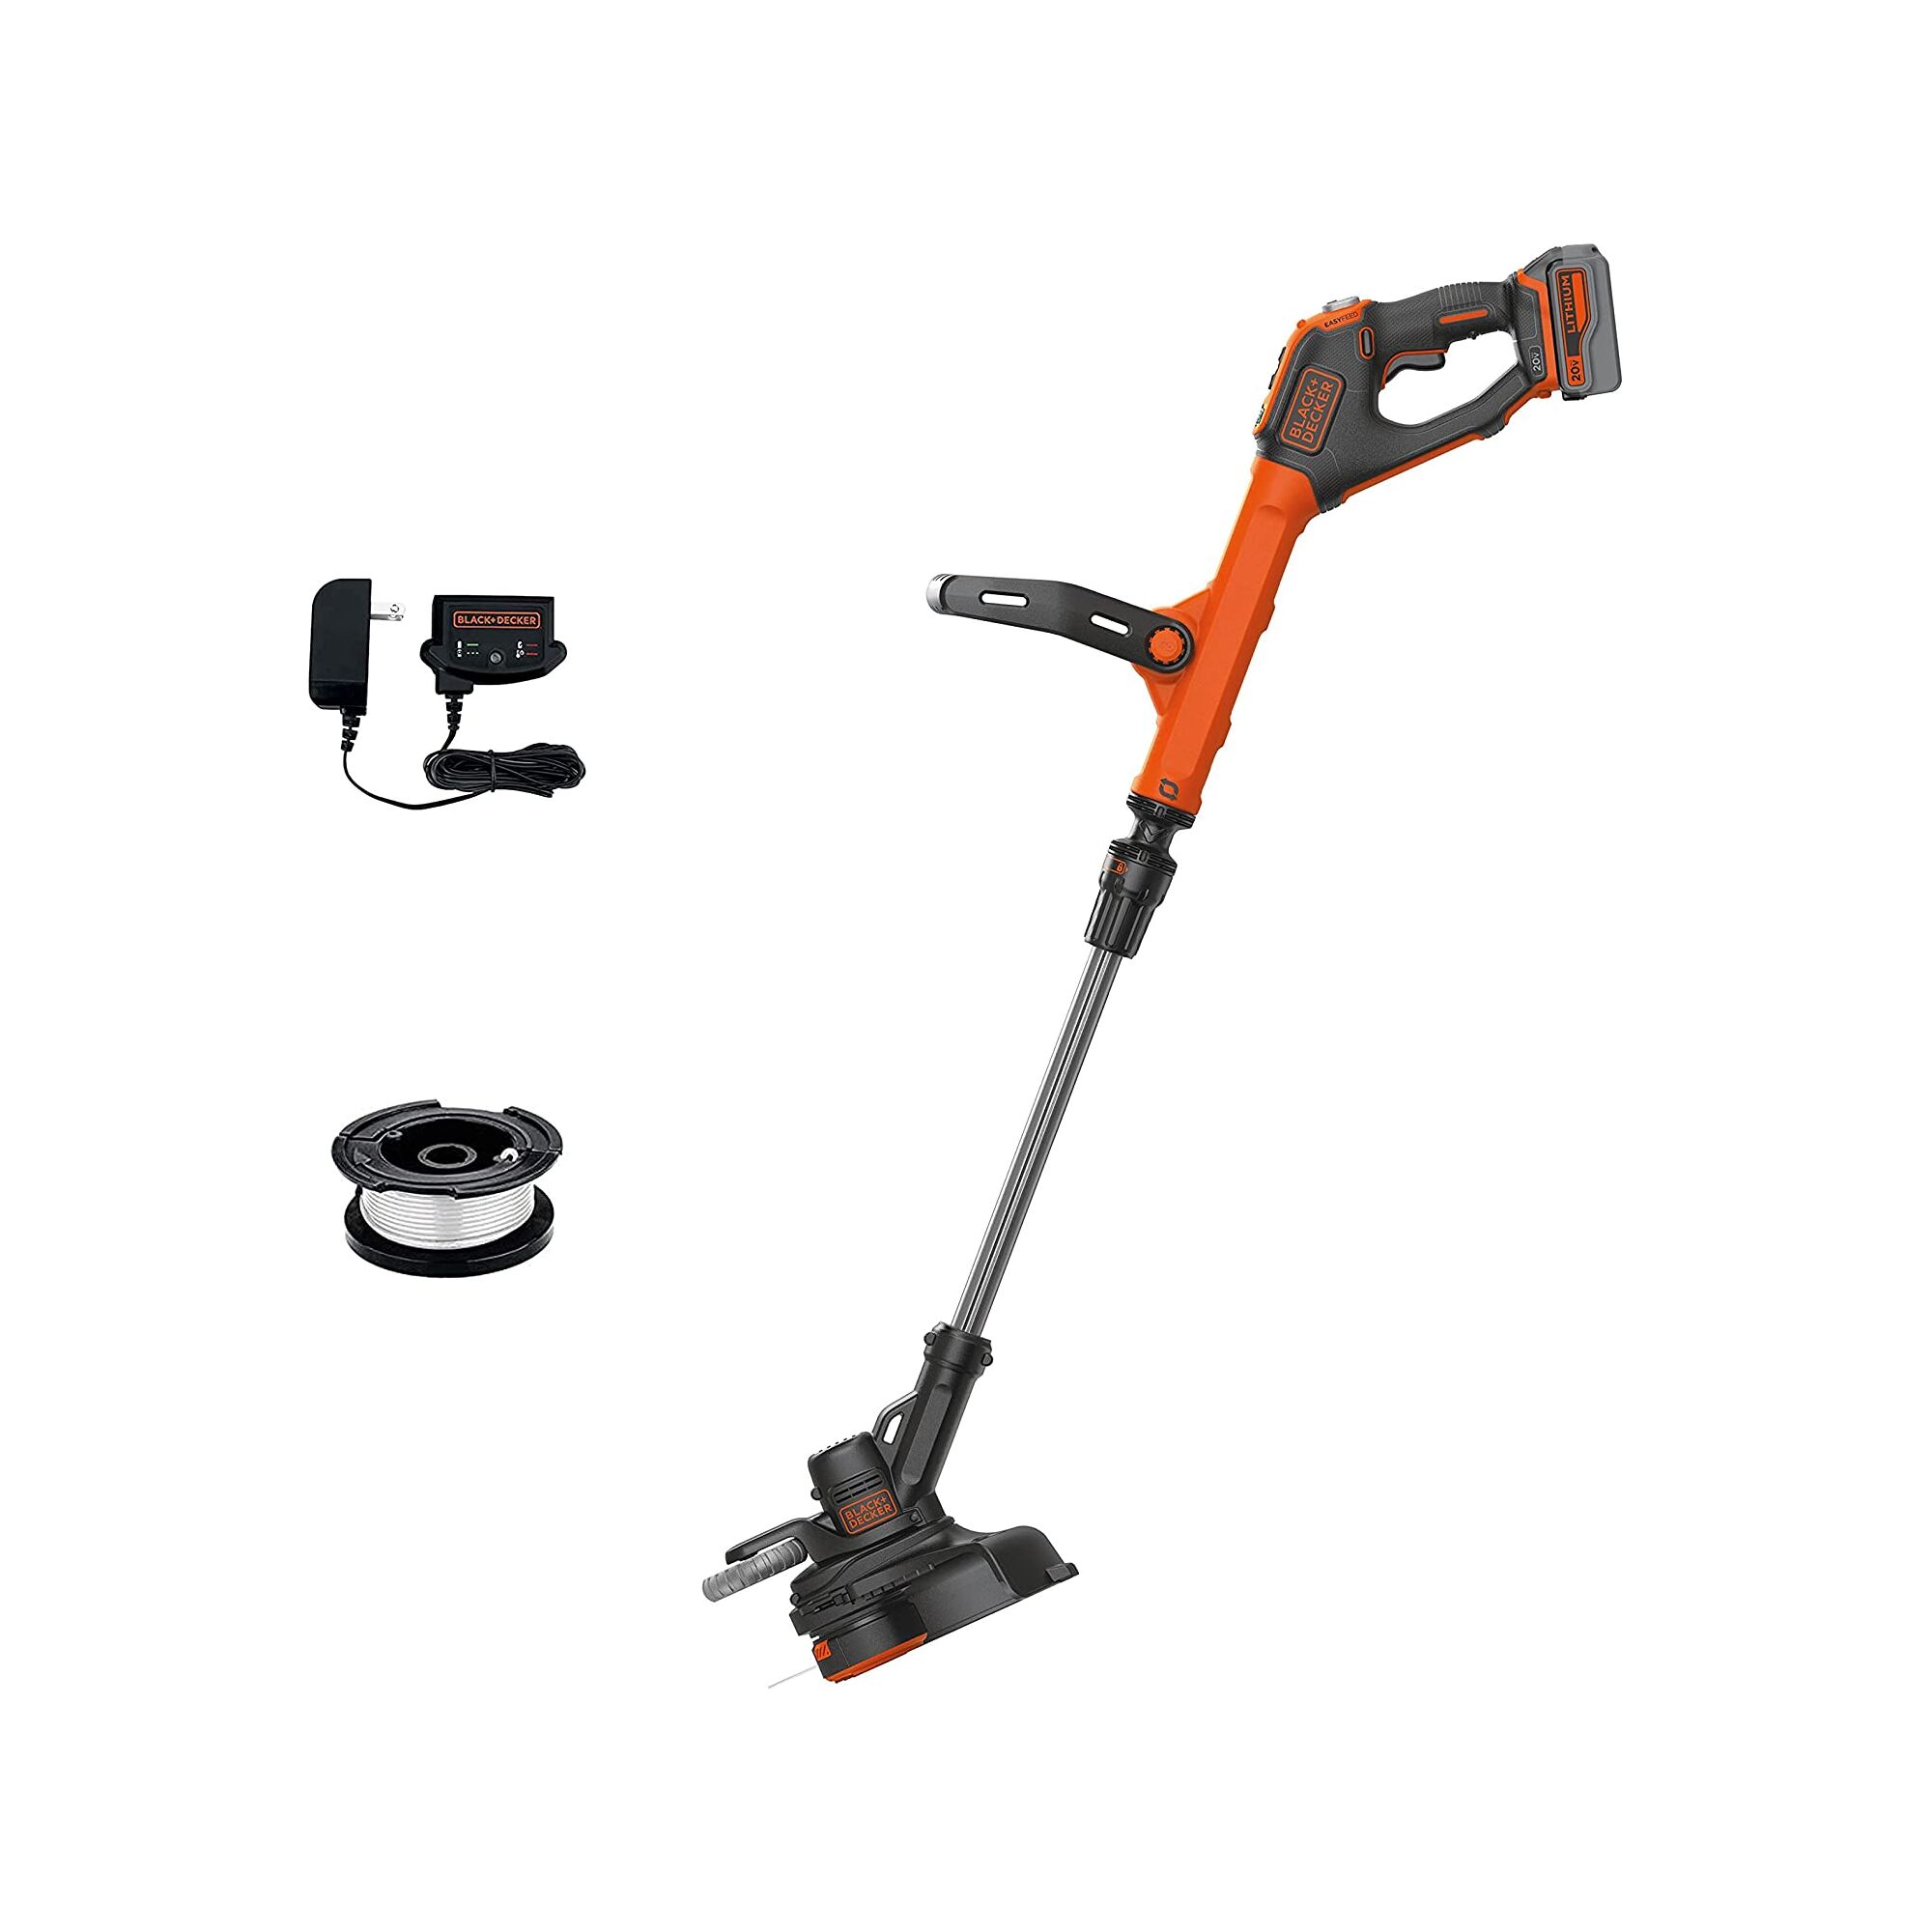 Profile view of 20V Max Lithium Easyfeed string Trimmer/Edger